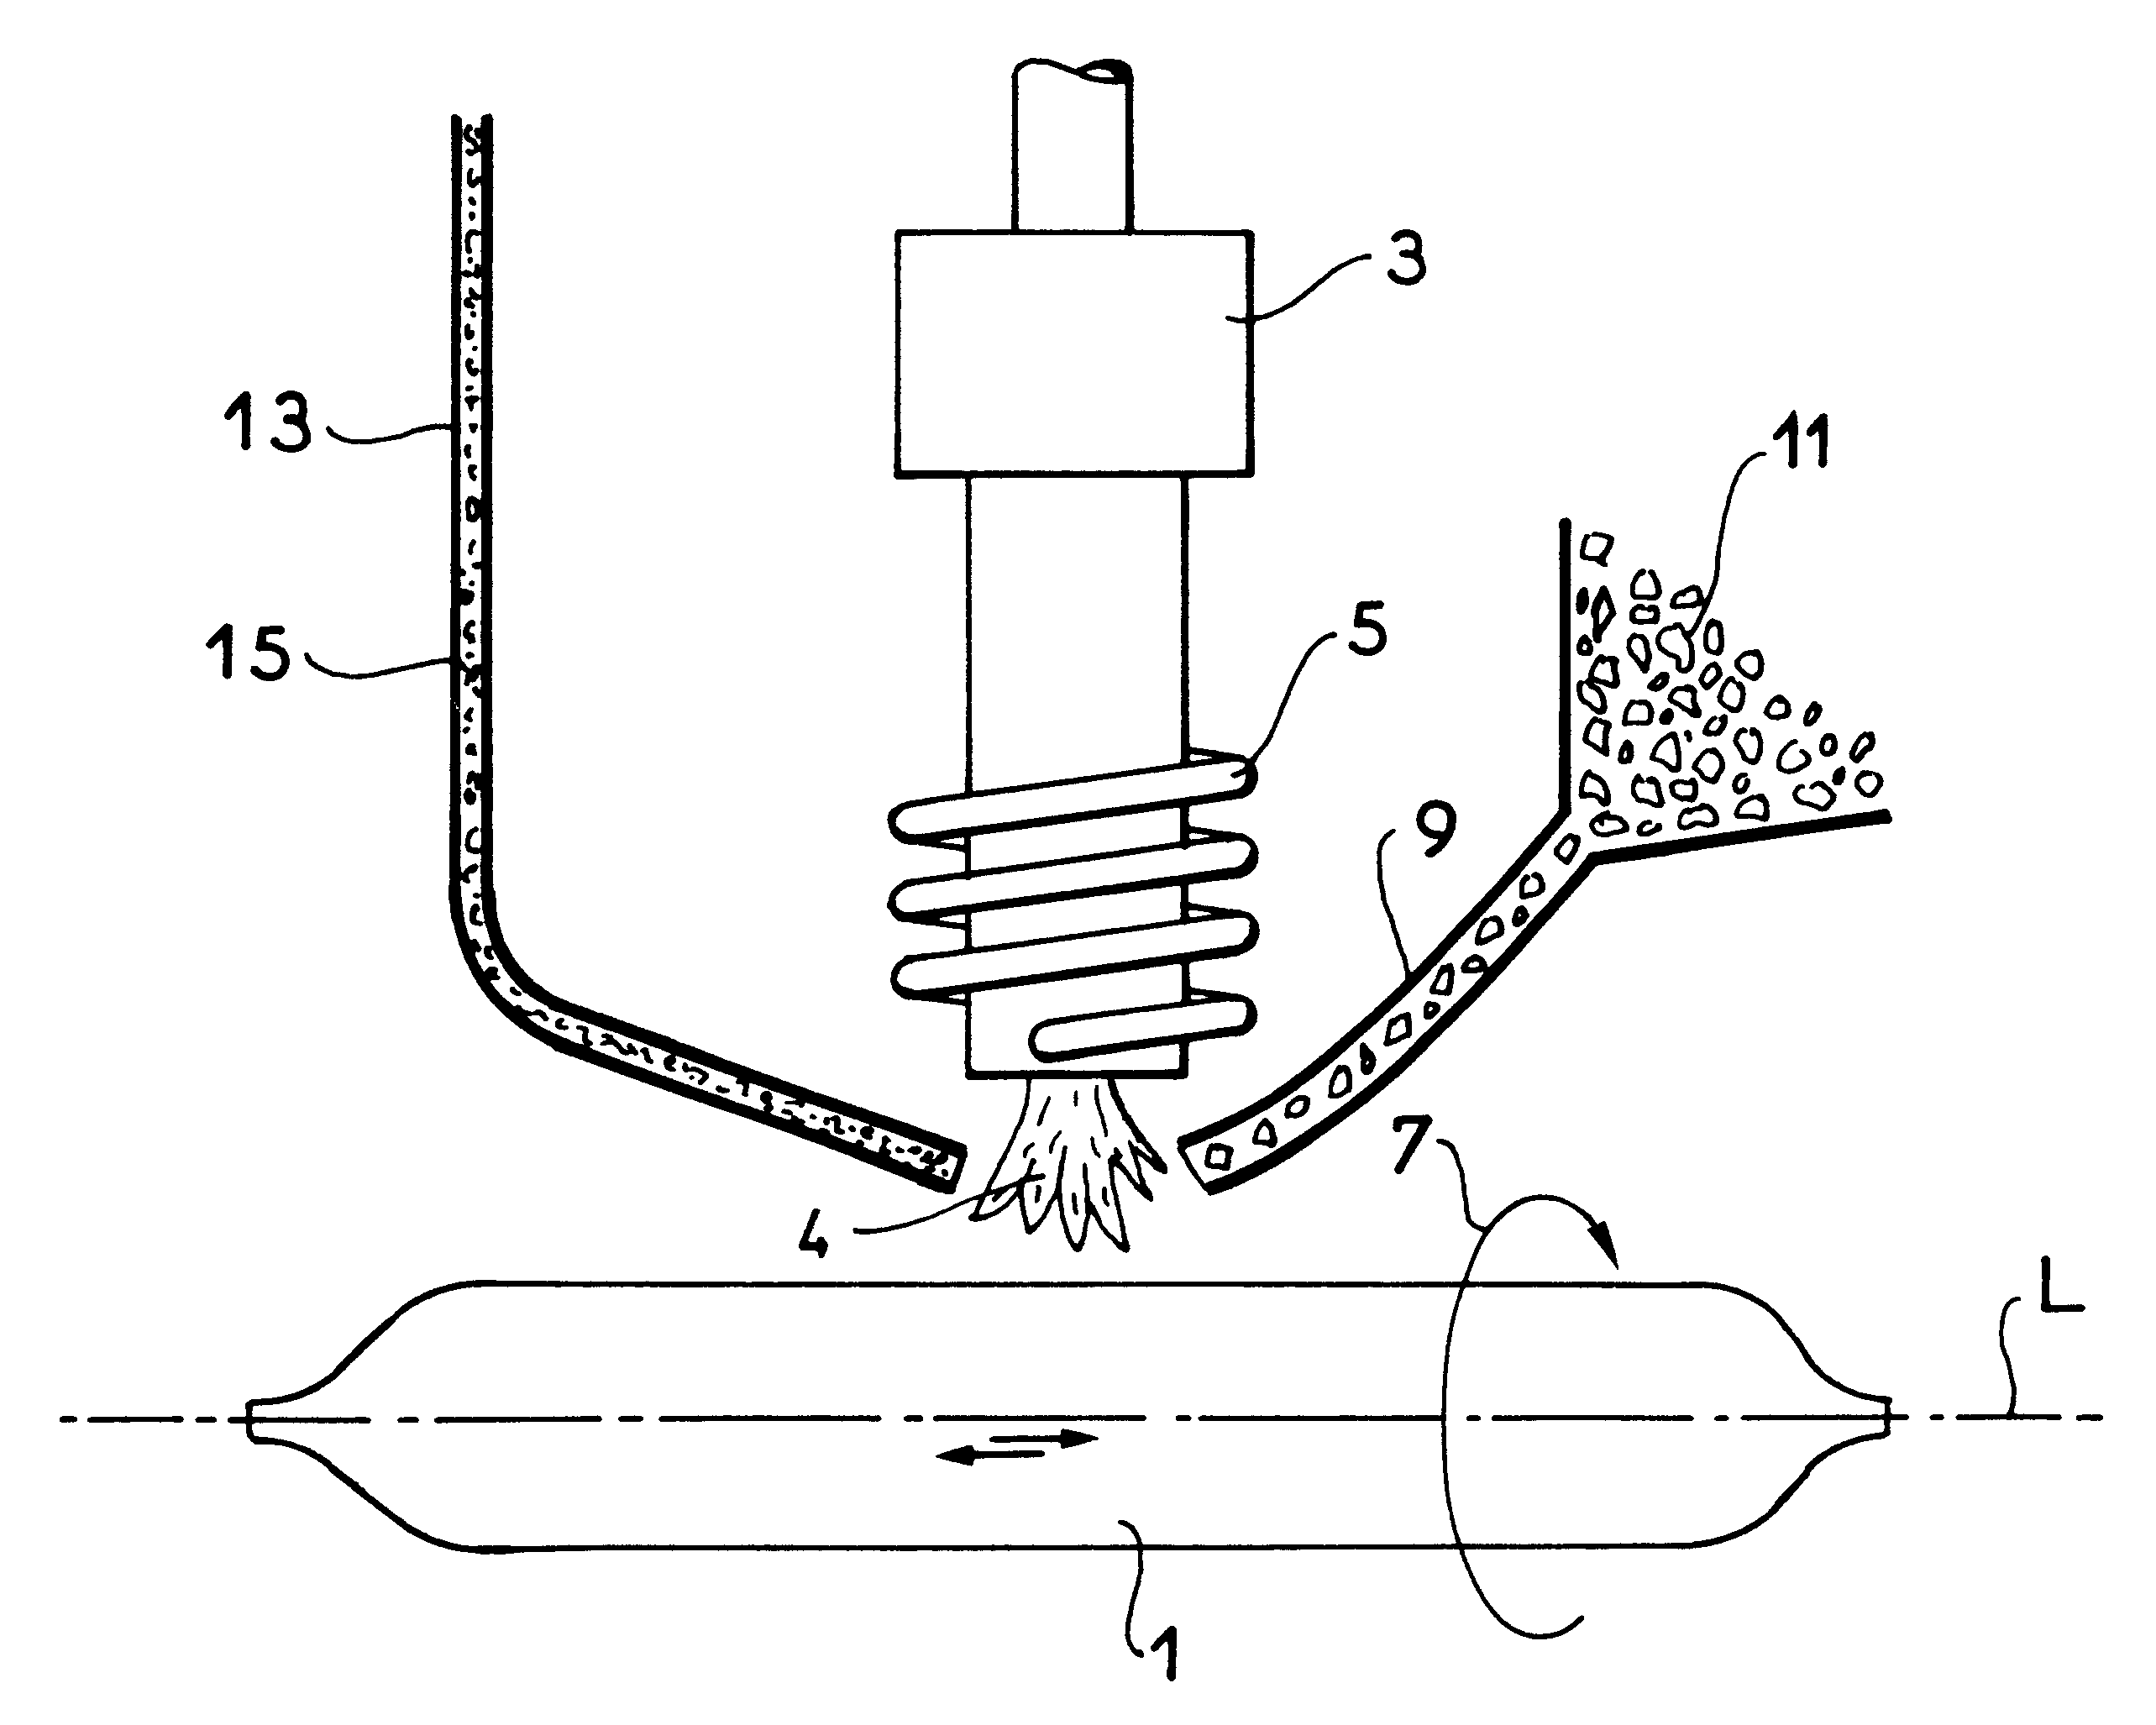 Method of purifying natural or synthetic silica, and application thereof to depositing purified natural or synthetic silica on an optical fiber preform